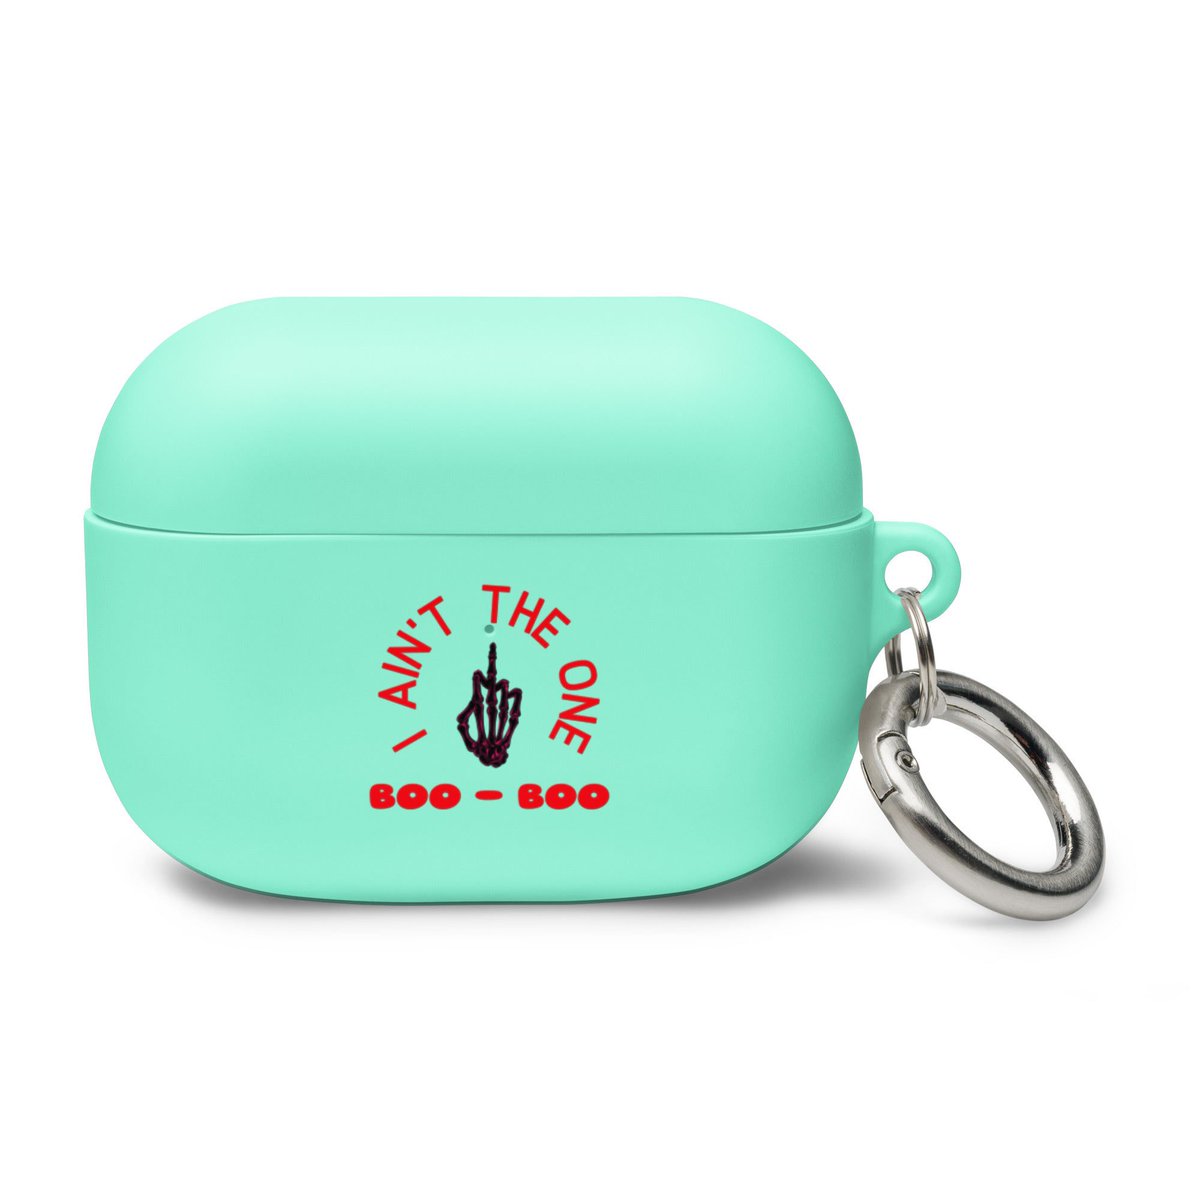 America’s Swag 312 Rubber Case for AirPods®

Available for purchase at americasswag.com/products/ameri…

#fashion #fashionblogger #fashionista #fashionstyle #fashionable #style #fashiongram #beautiful #fashionphotography #fashionblog #fashionweek #fashiondiaries #fashiondesigner #fashion